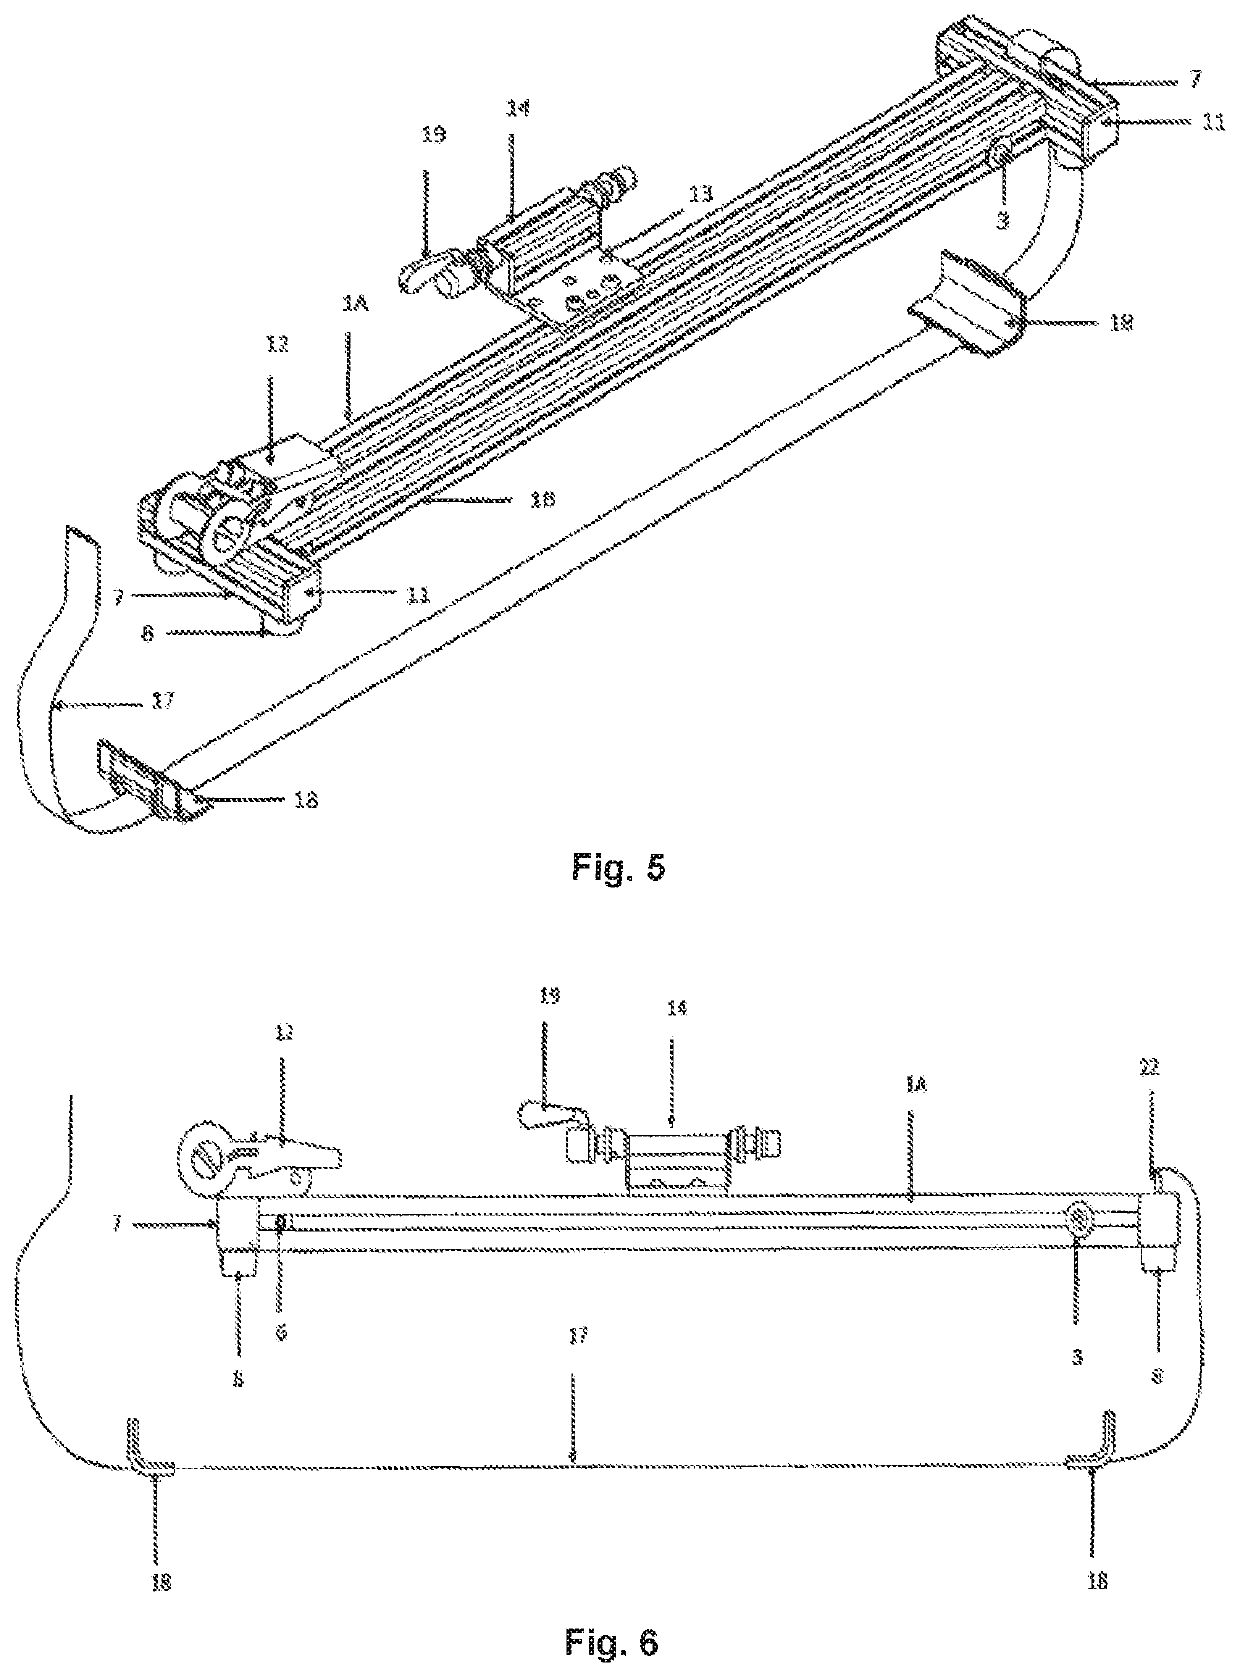 Configurable carrier for transporting bicycles inside a vehicle